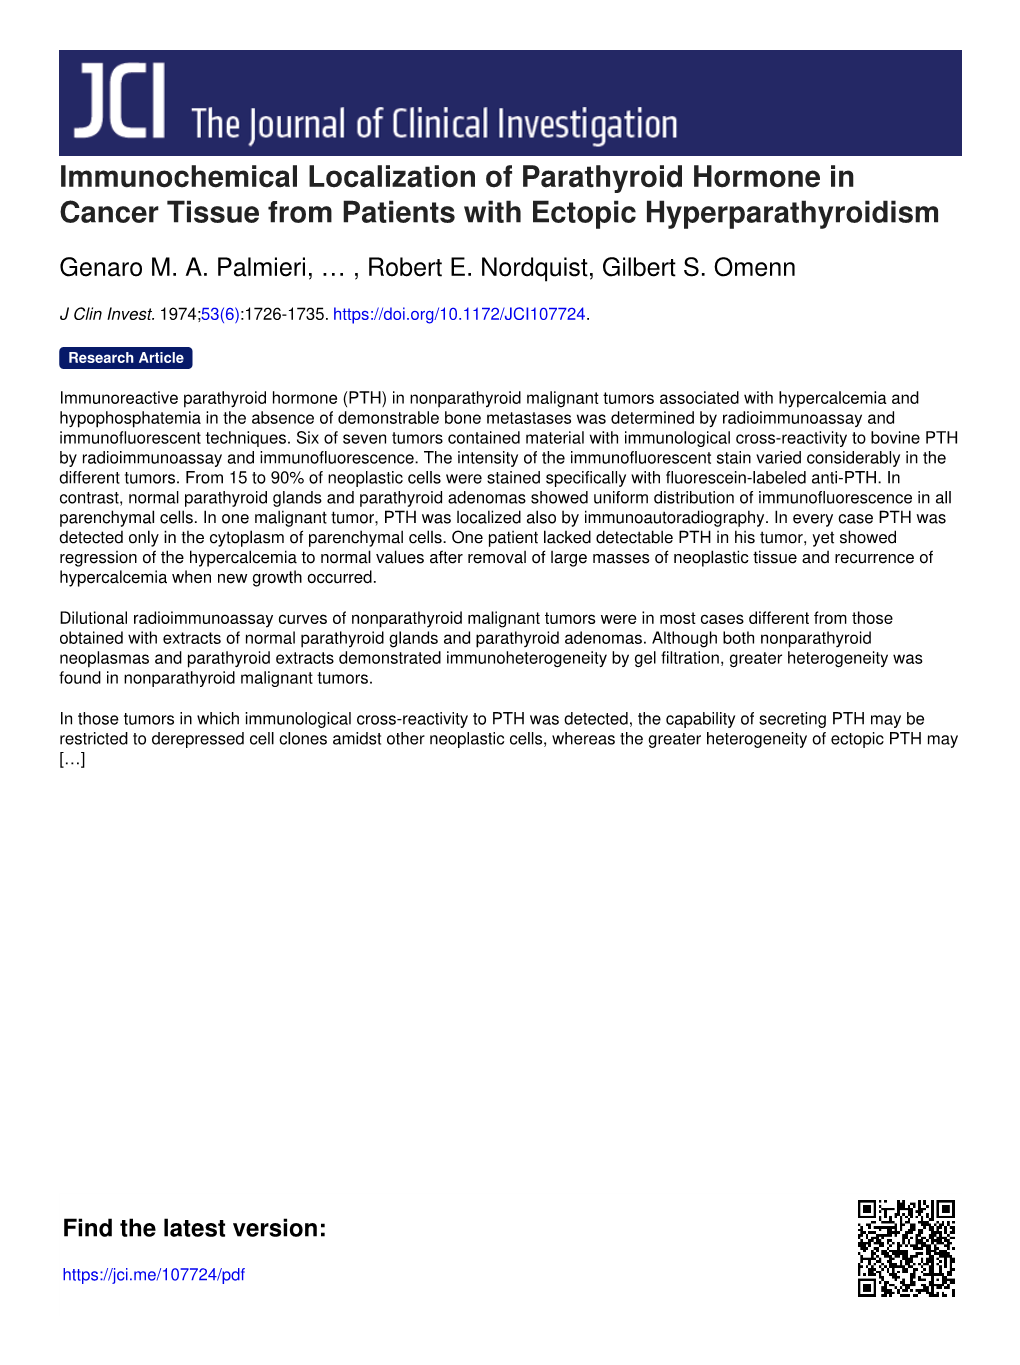 Immunochemical Localization of Parathyroid Hormone in Cancer Tissue from Patients with Ectopic Hyperparathyroidism